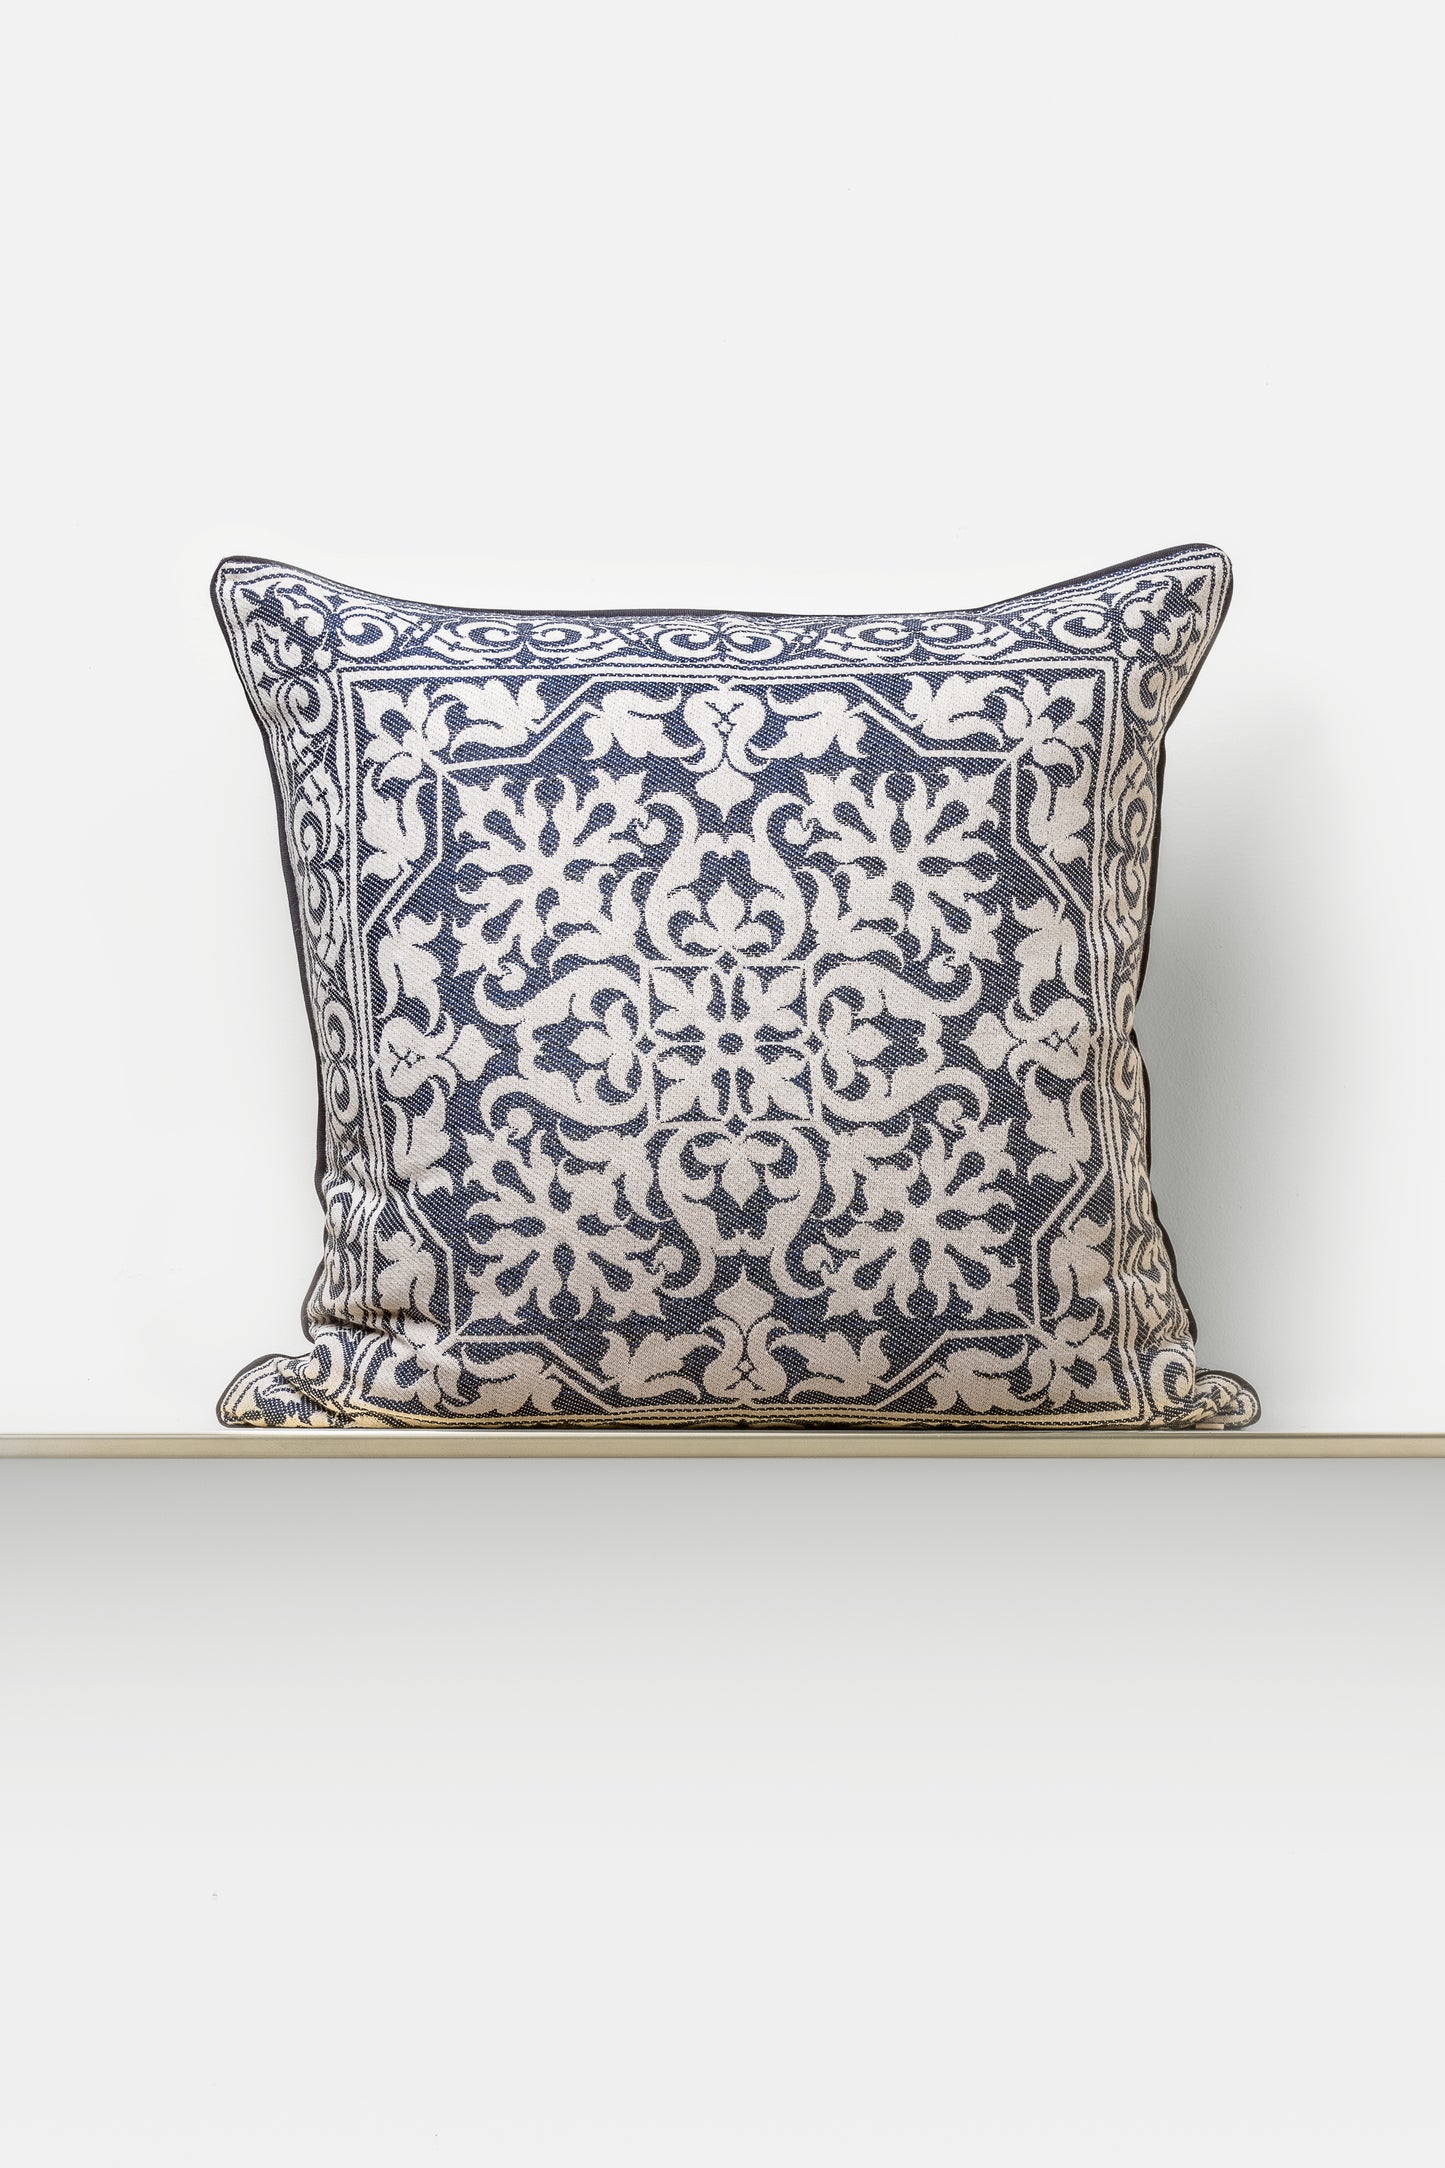 "Palermo" cushion in Eclisse Blue